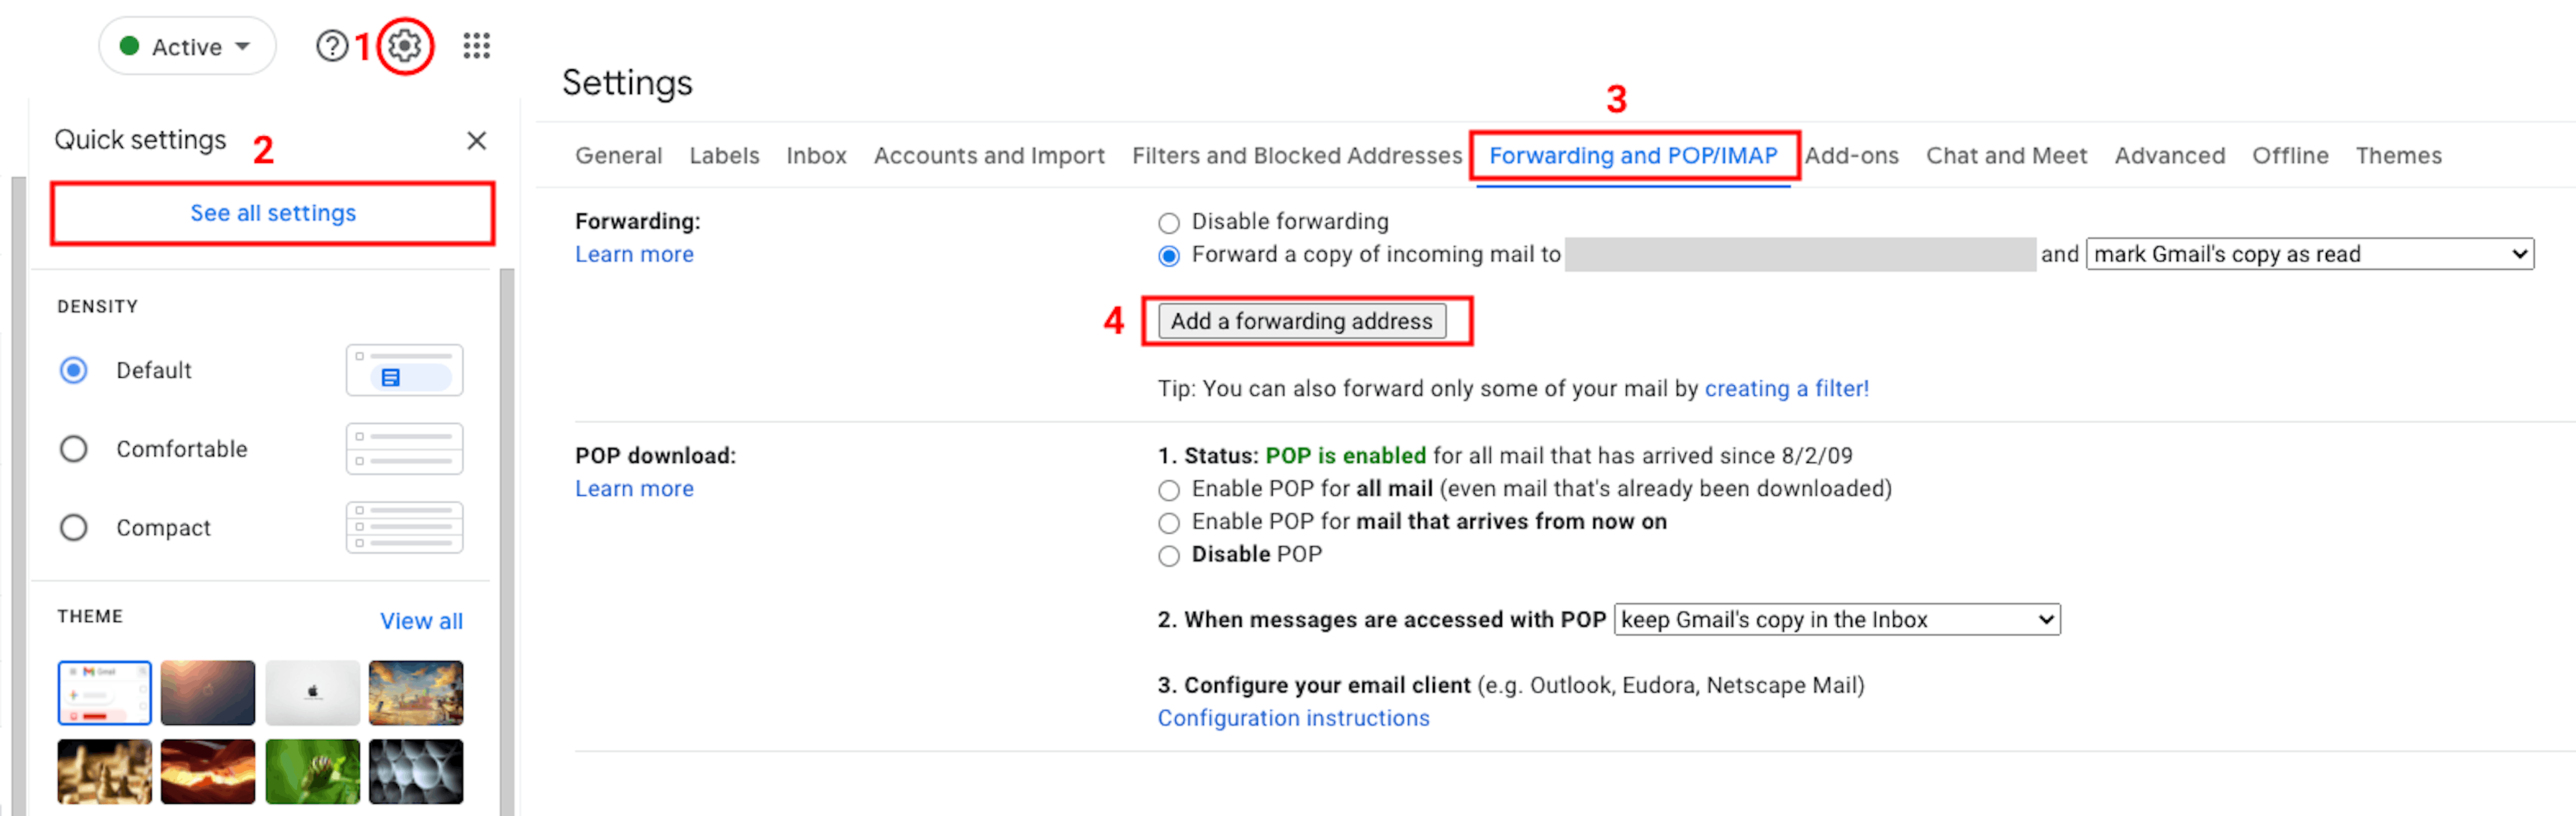 Click the gear icon to access all settings (left). From the Settings page, navigate to “Forwarding and POP/IMAP” to add a forwarding email address (right).